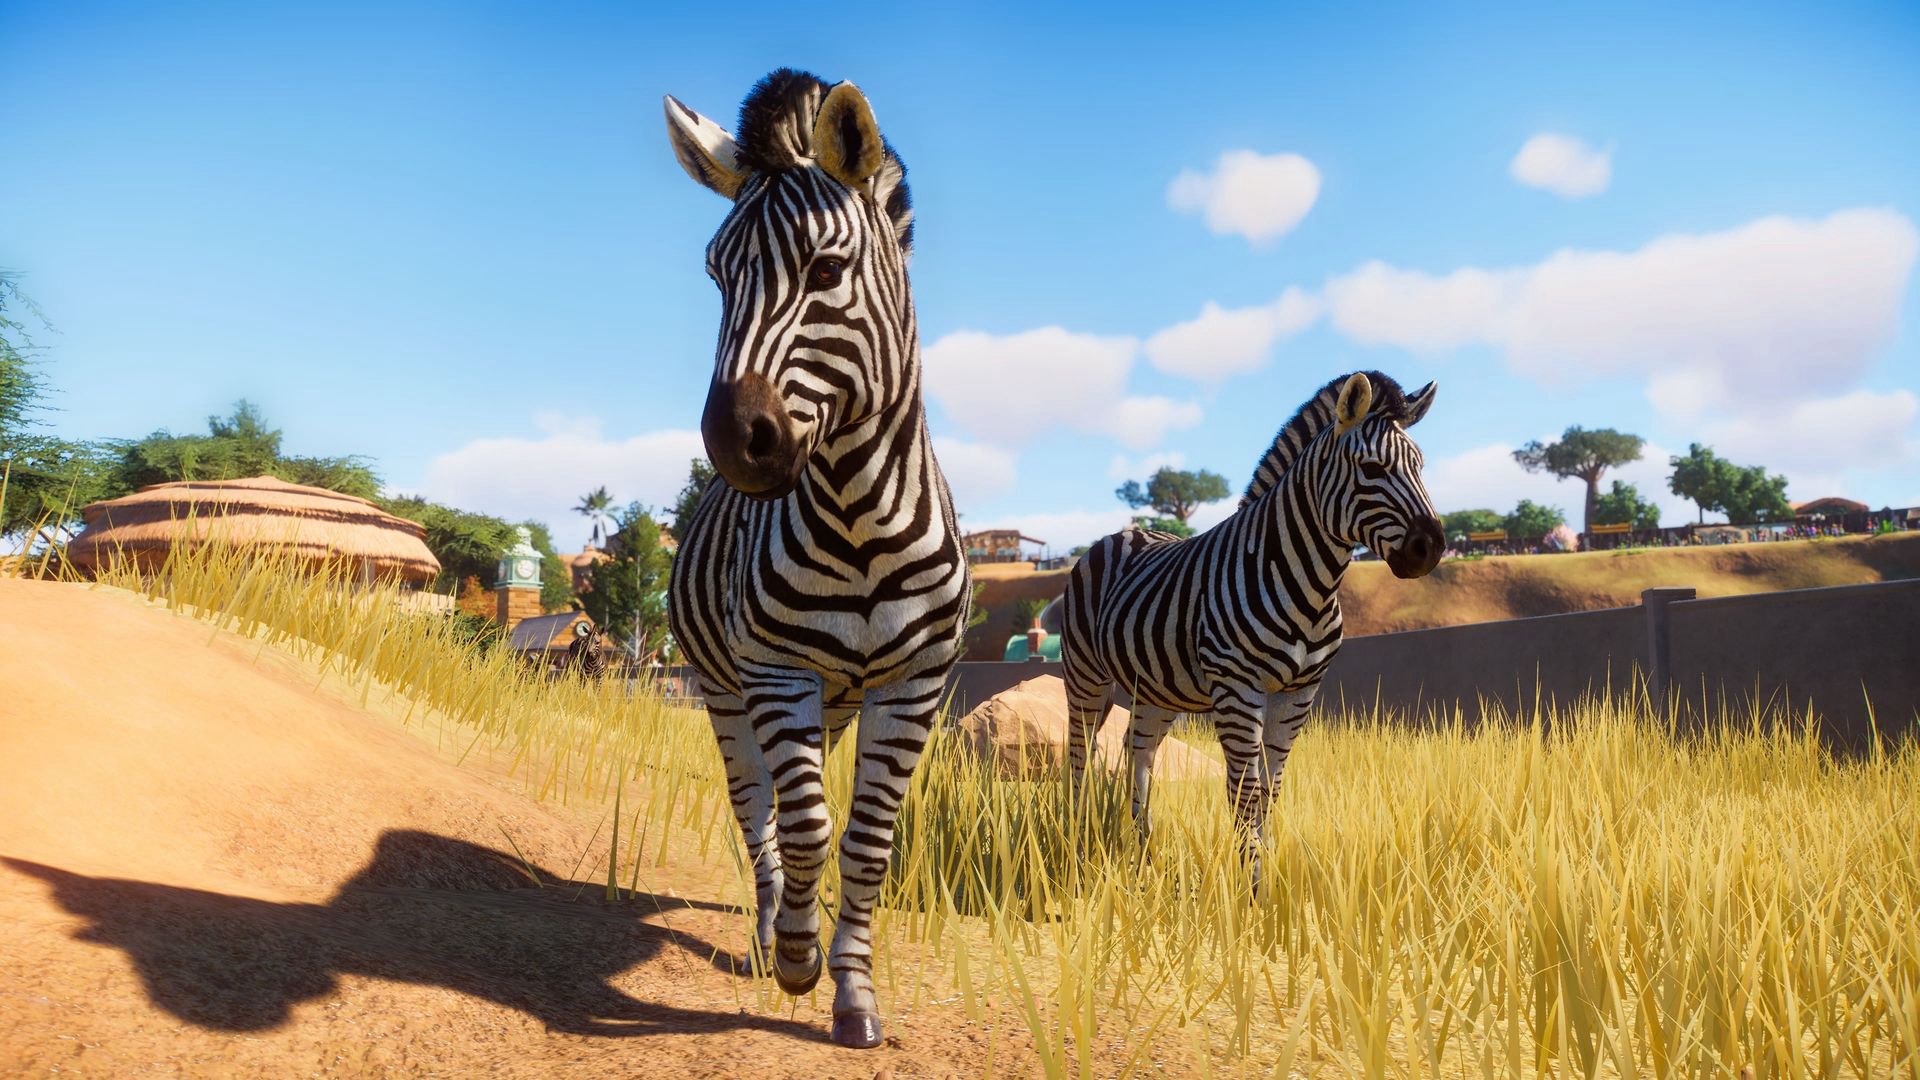 Planet Zoo Deluxe Edition Steam Altergift